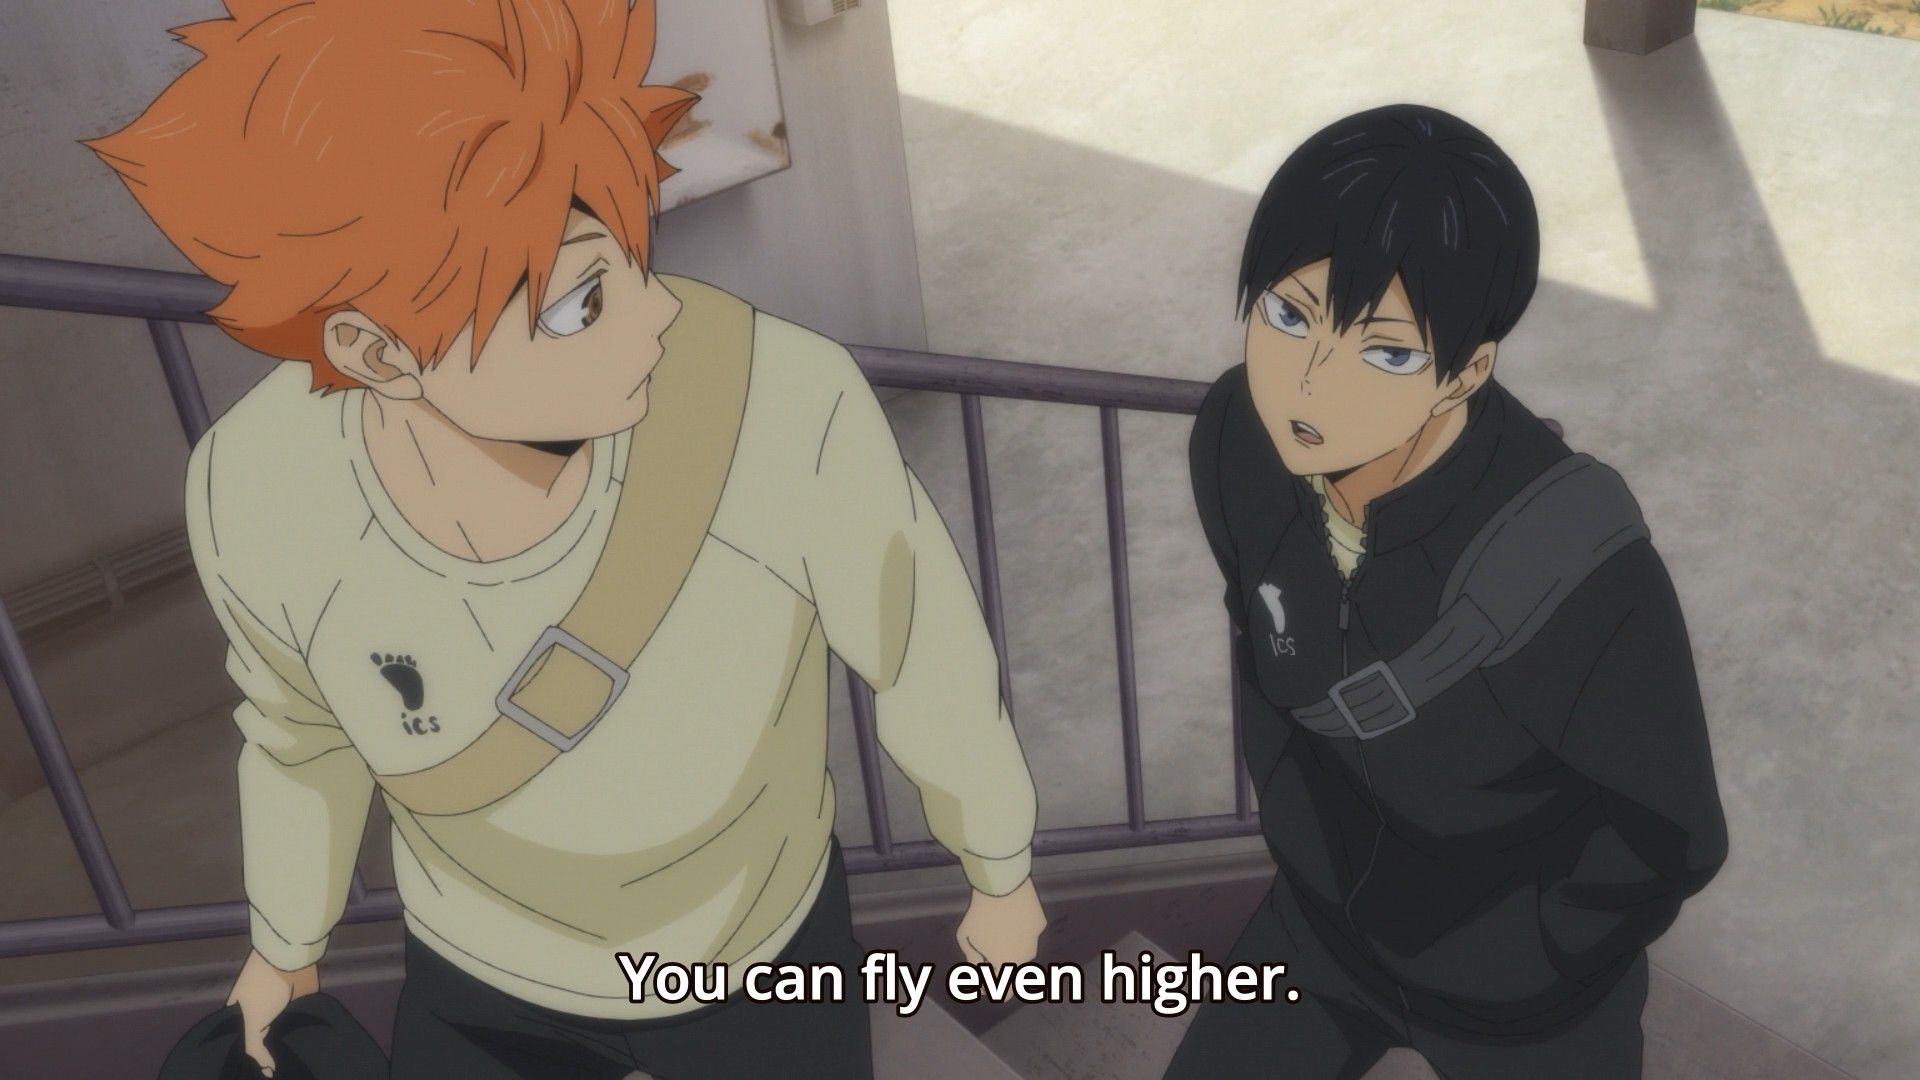 Had to make this my desktop wallpaper! One of my favorite moments in series!: haikyuu